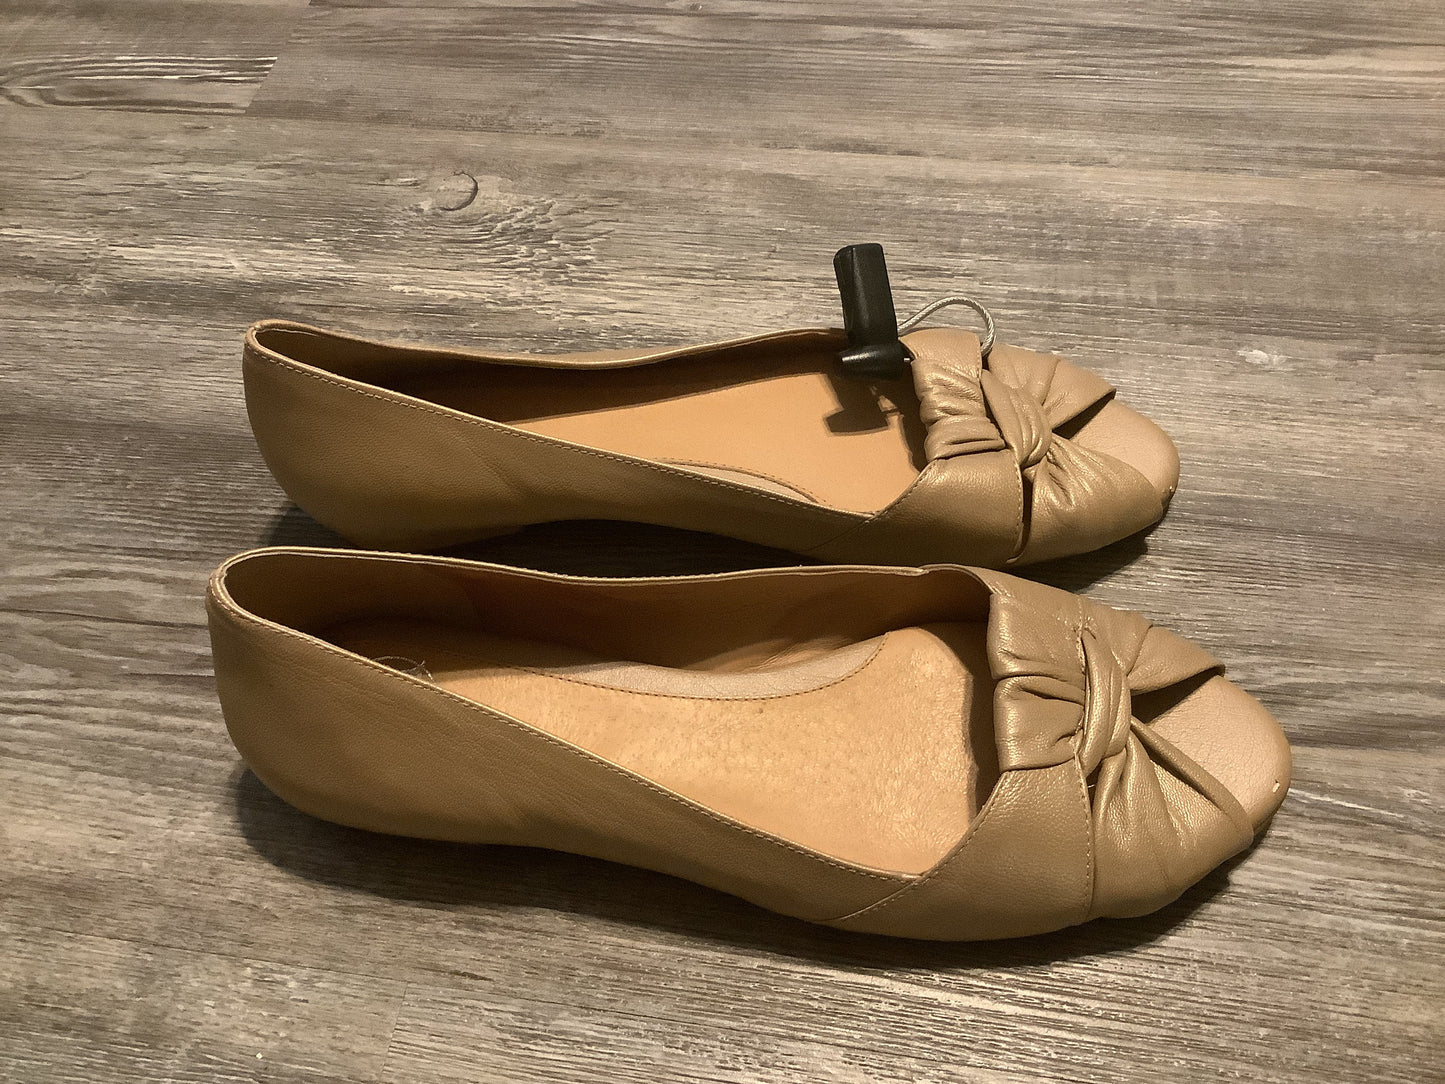 Gold Shoes Flats Clothes Mentor, Size 11